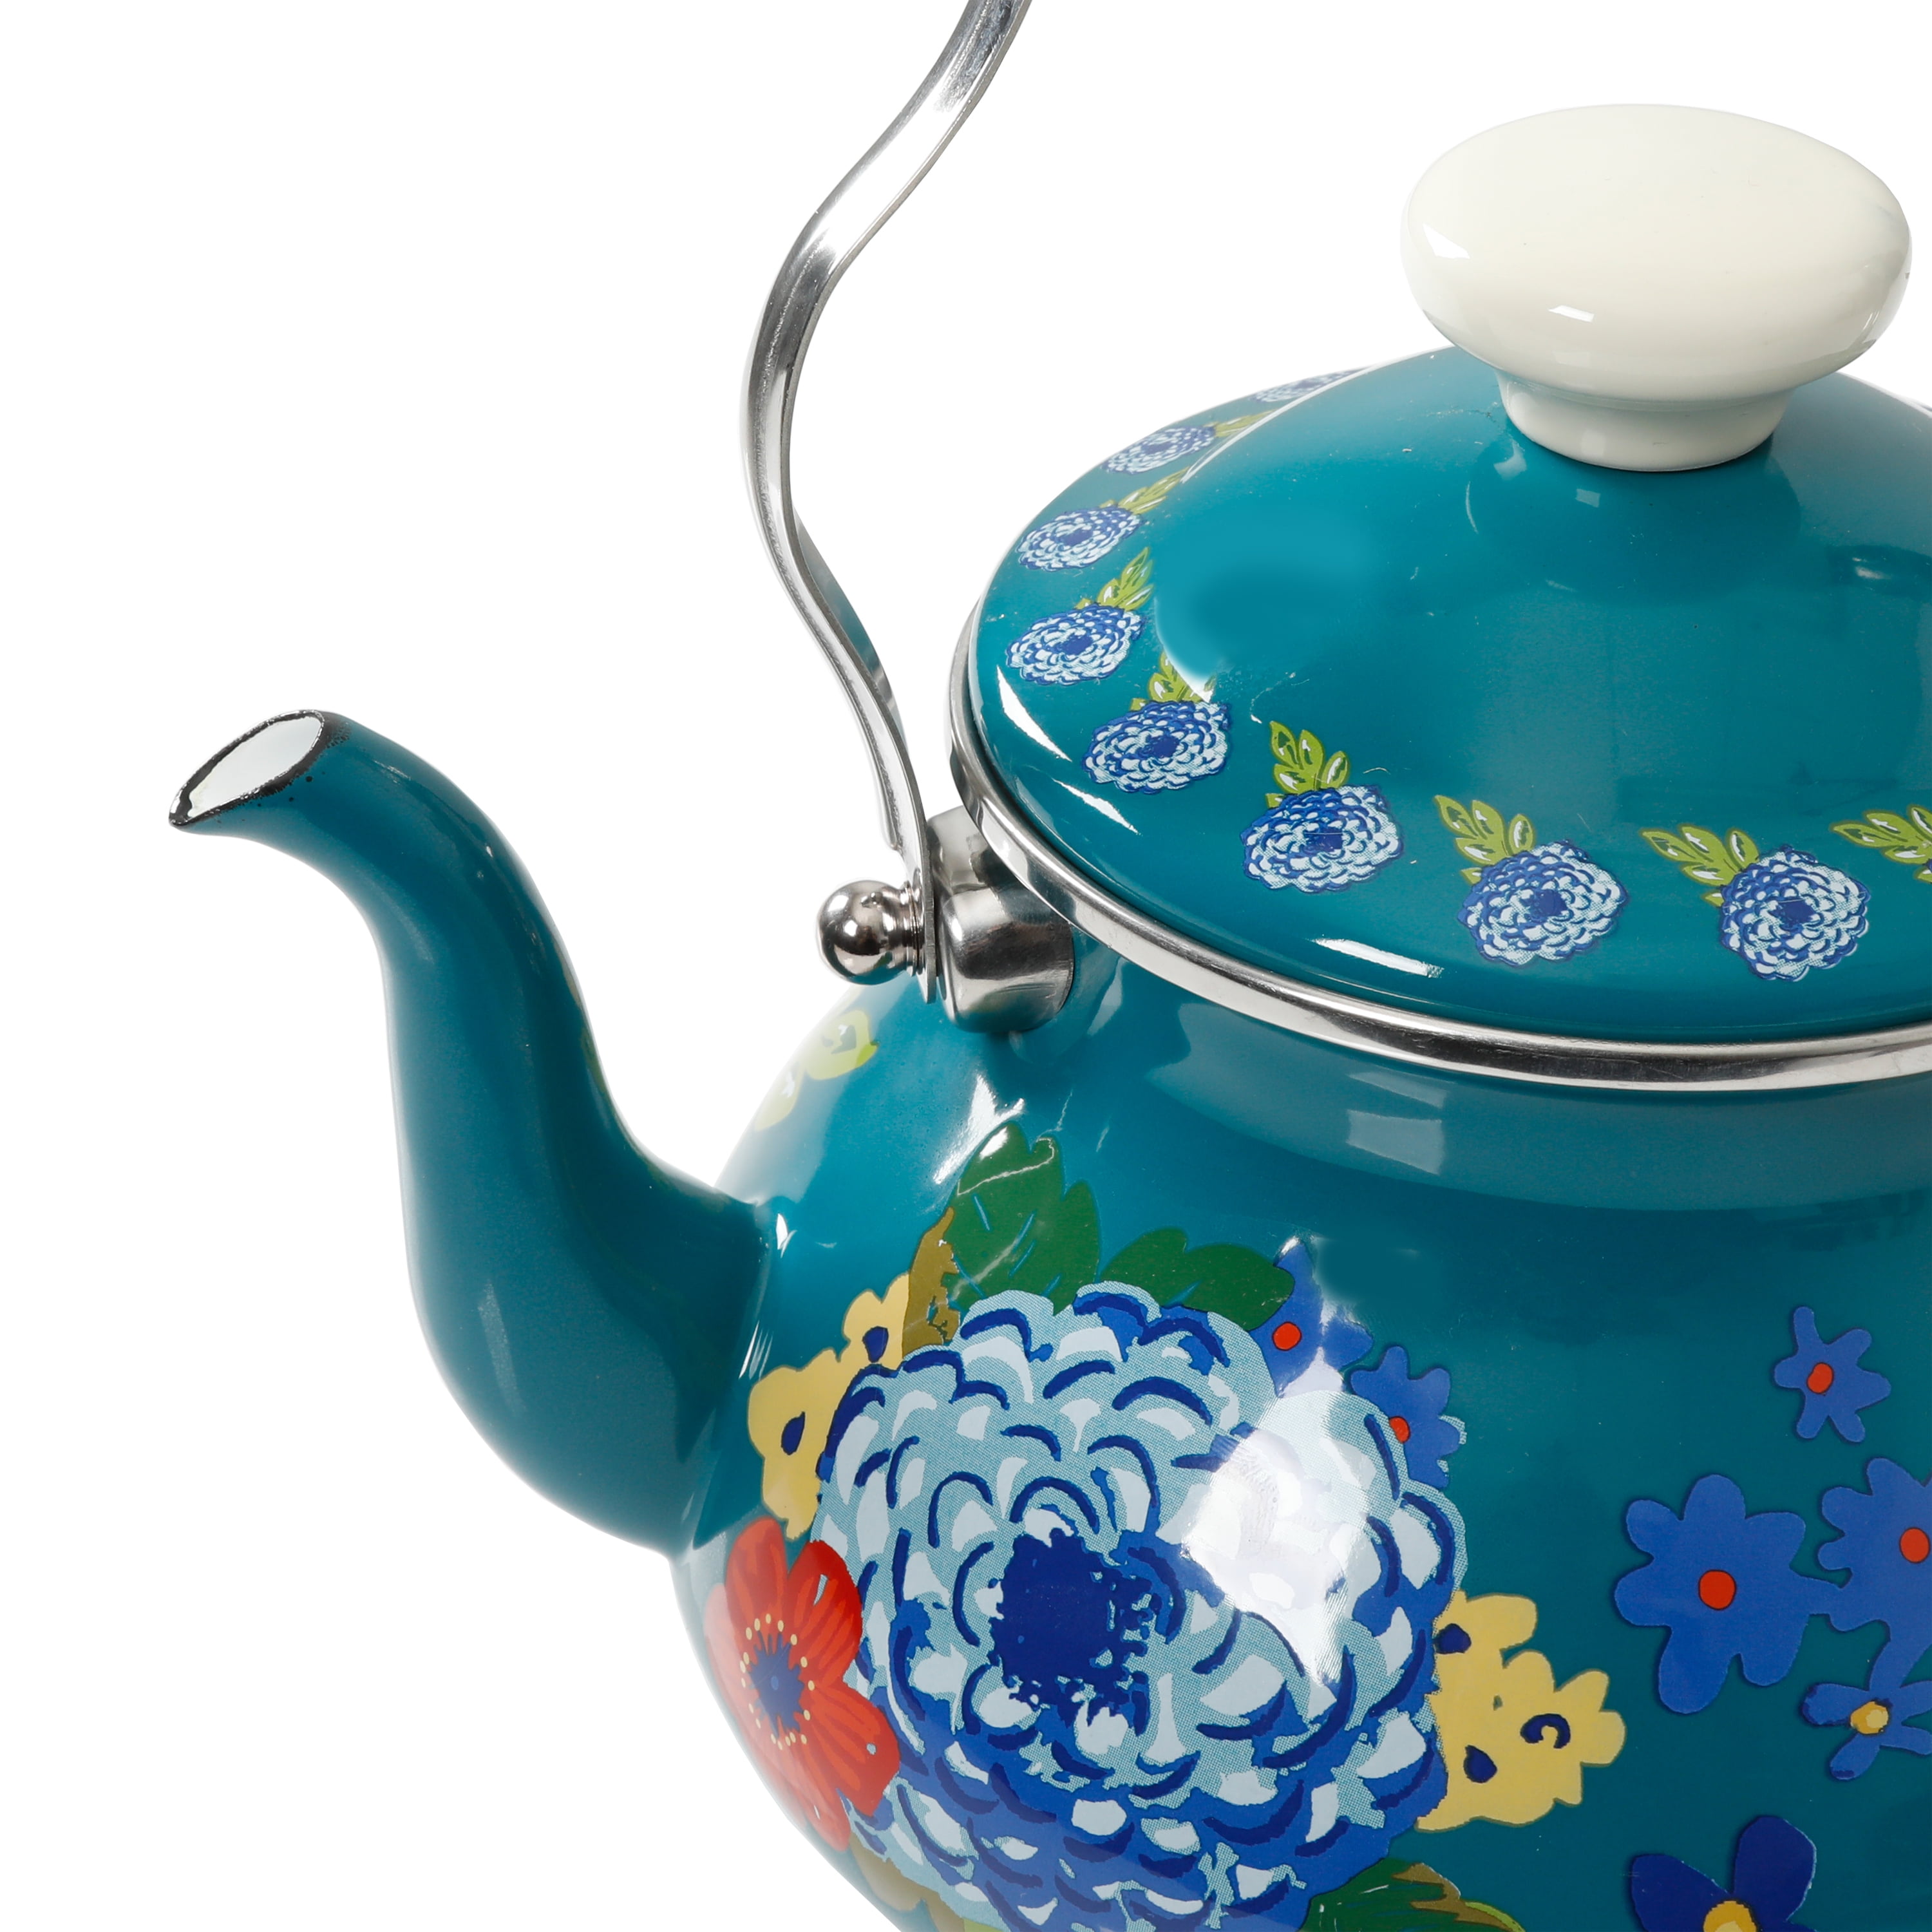 Clay Tea Kettle (8 oz) and Brazier – In Pursuit of Tea